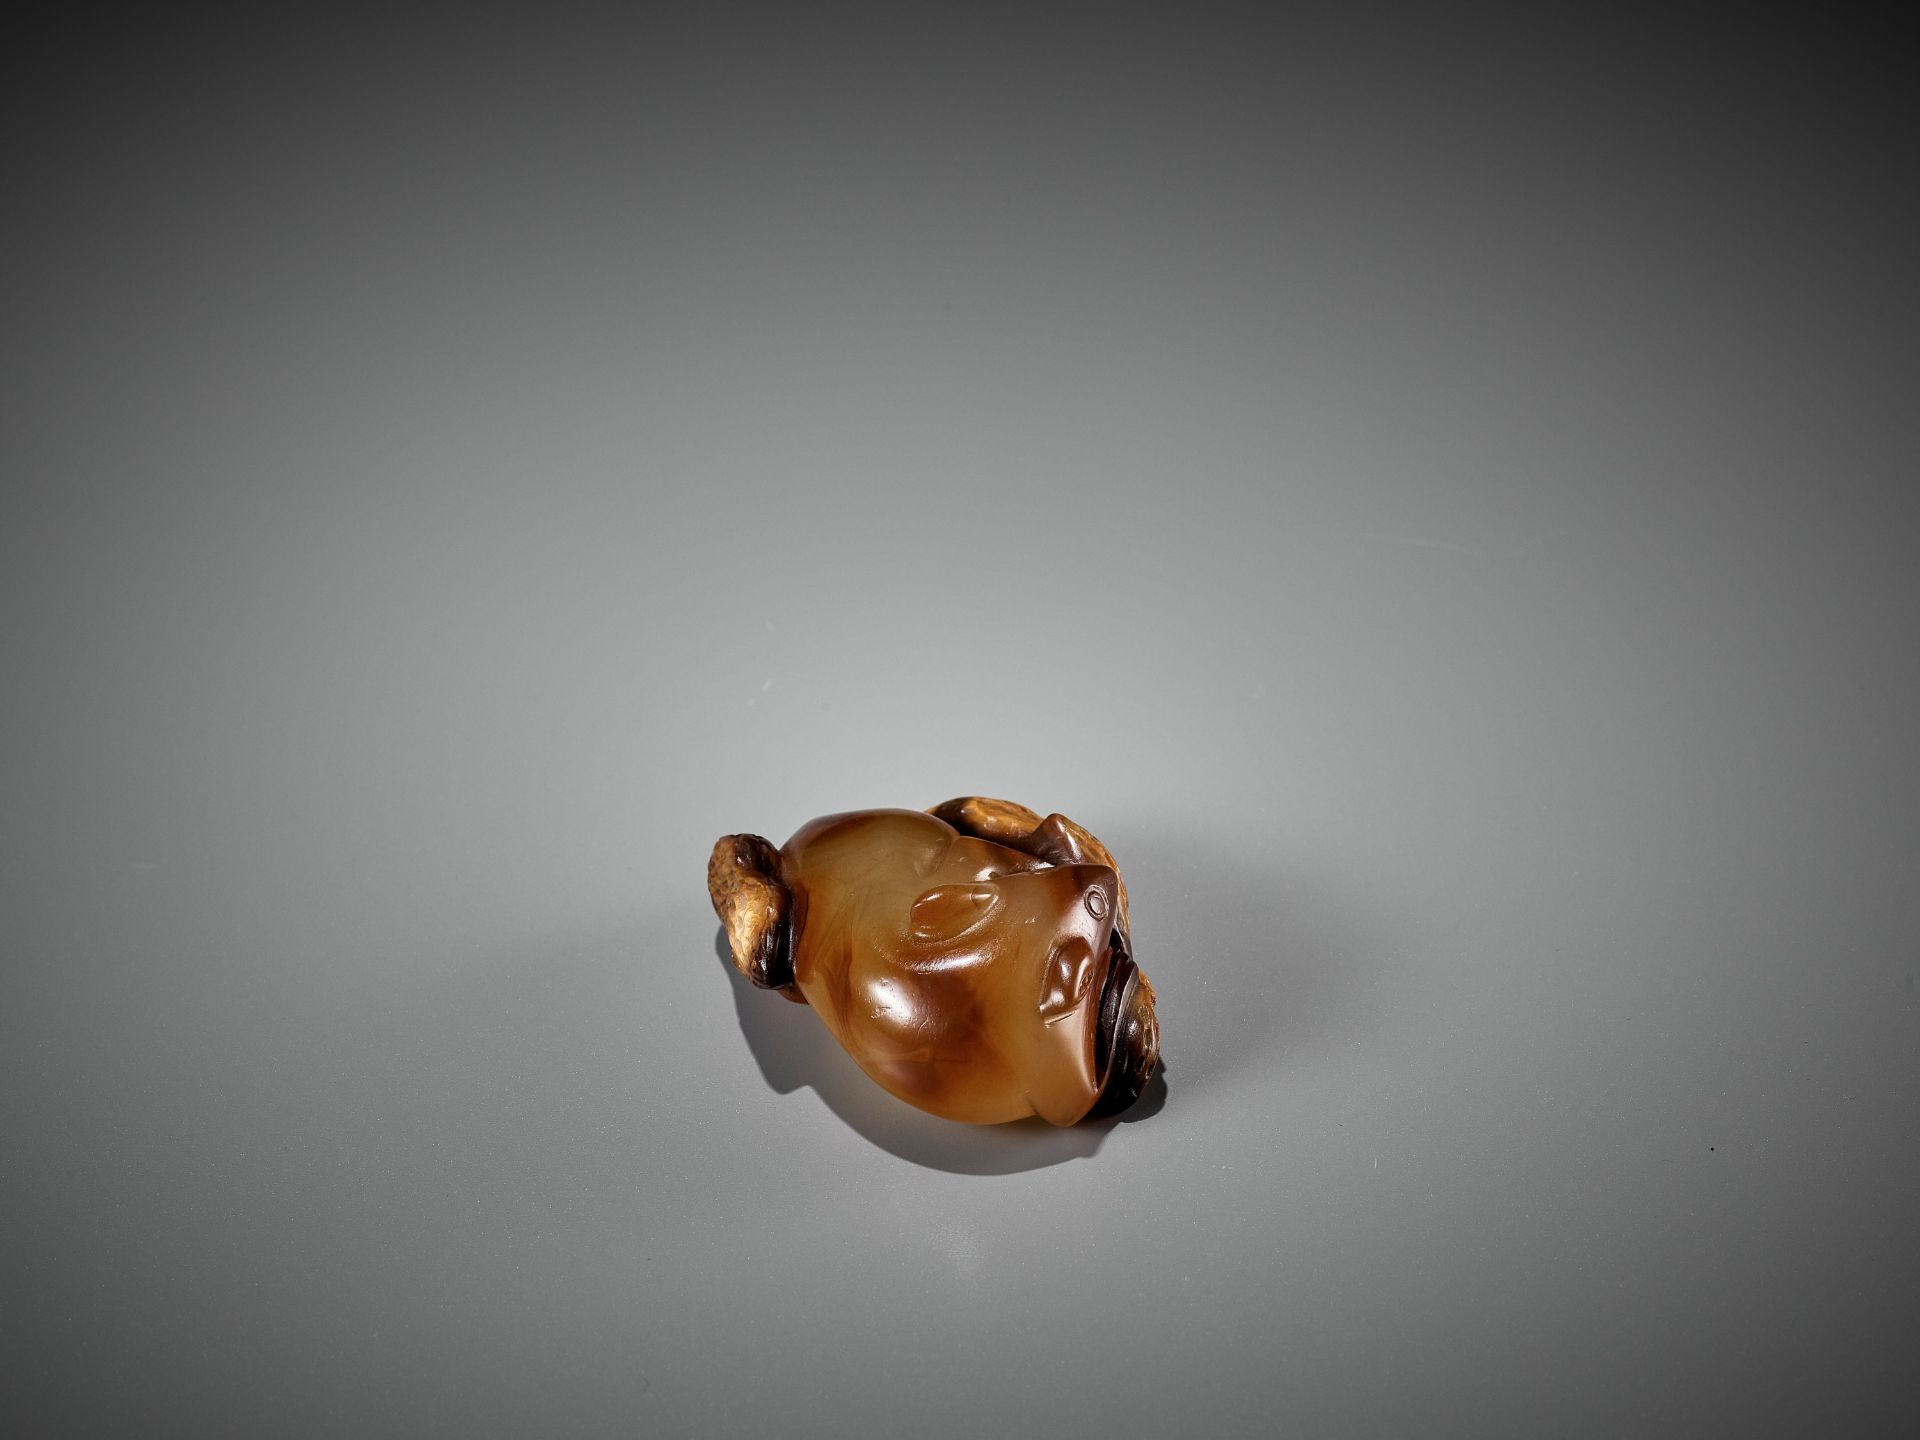 AN AGATE PENDANT OF A SQUIRREL WITH PEANUTS, 18TH-19TH CENTURY - Image 10 of 14